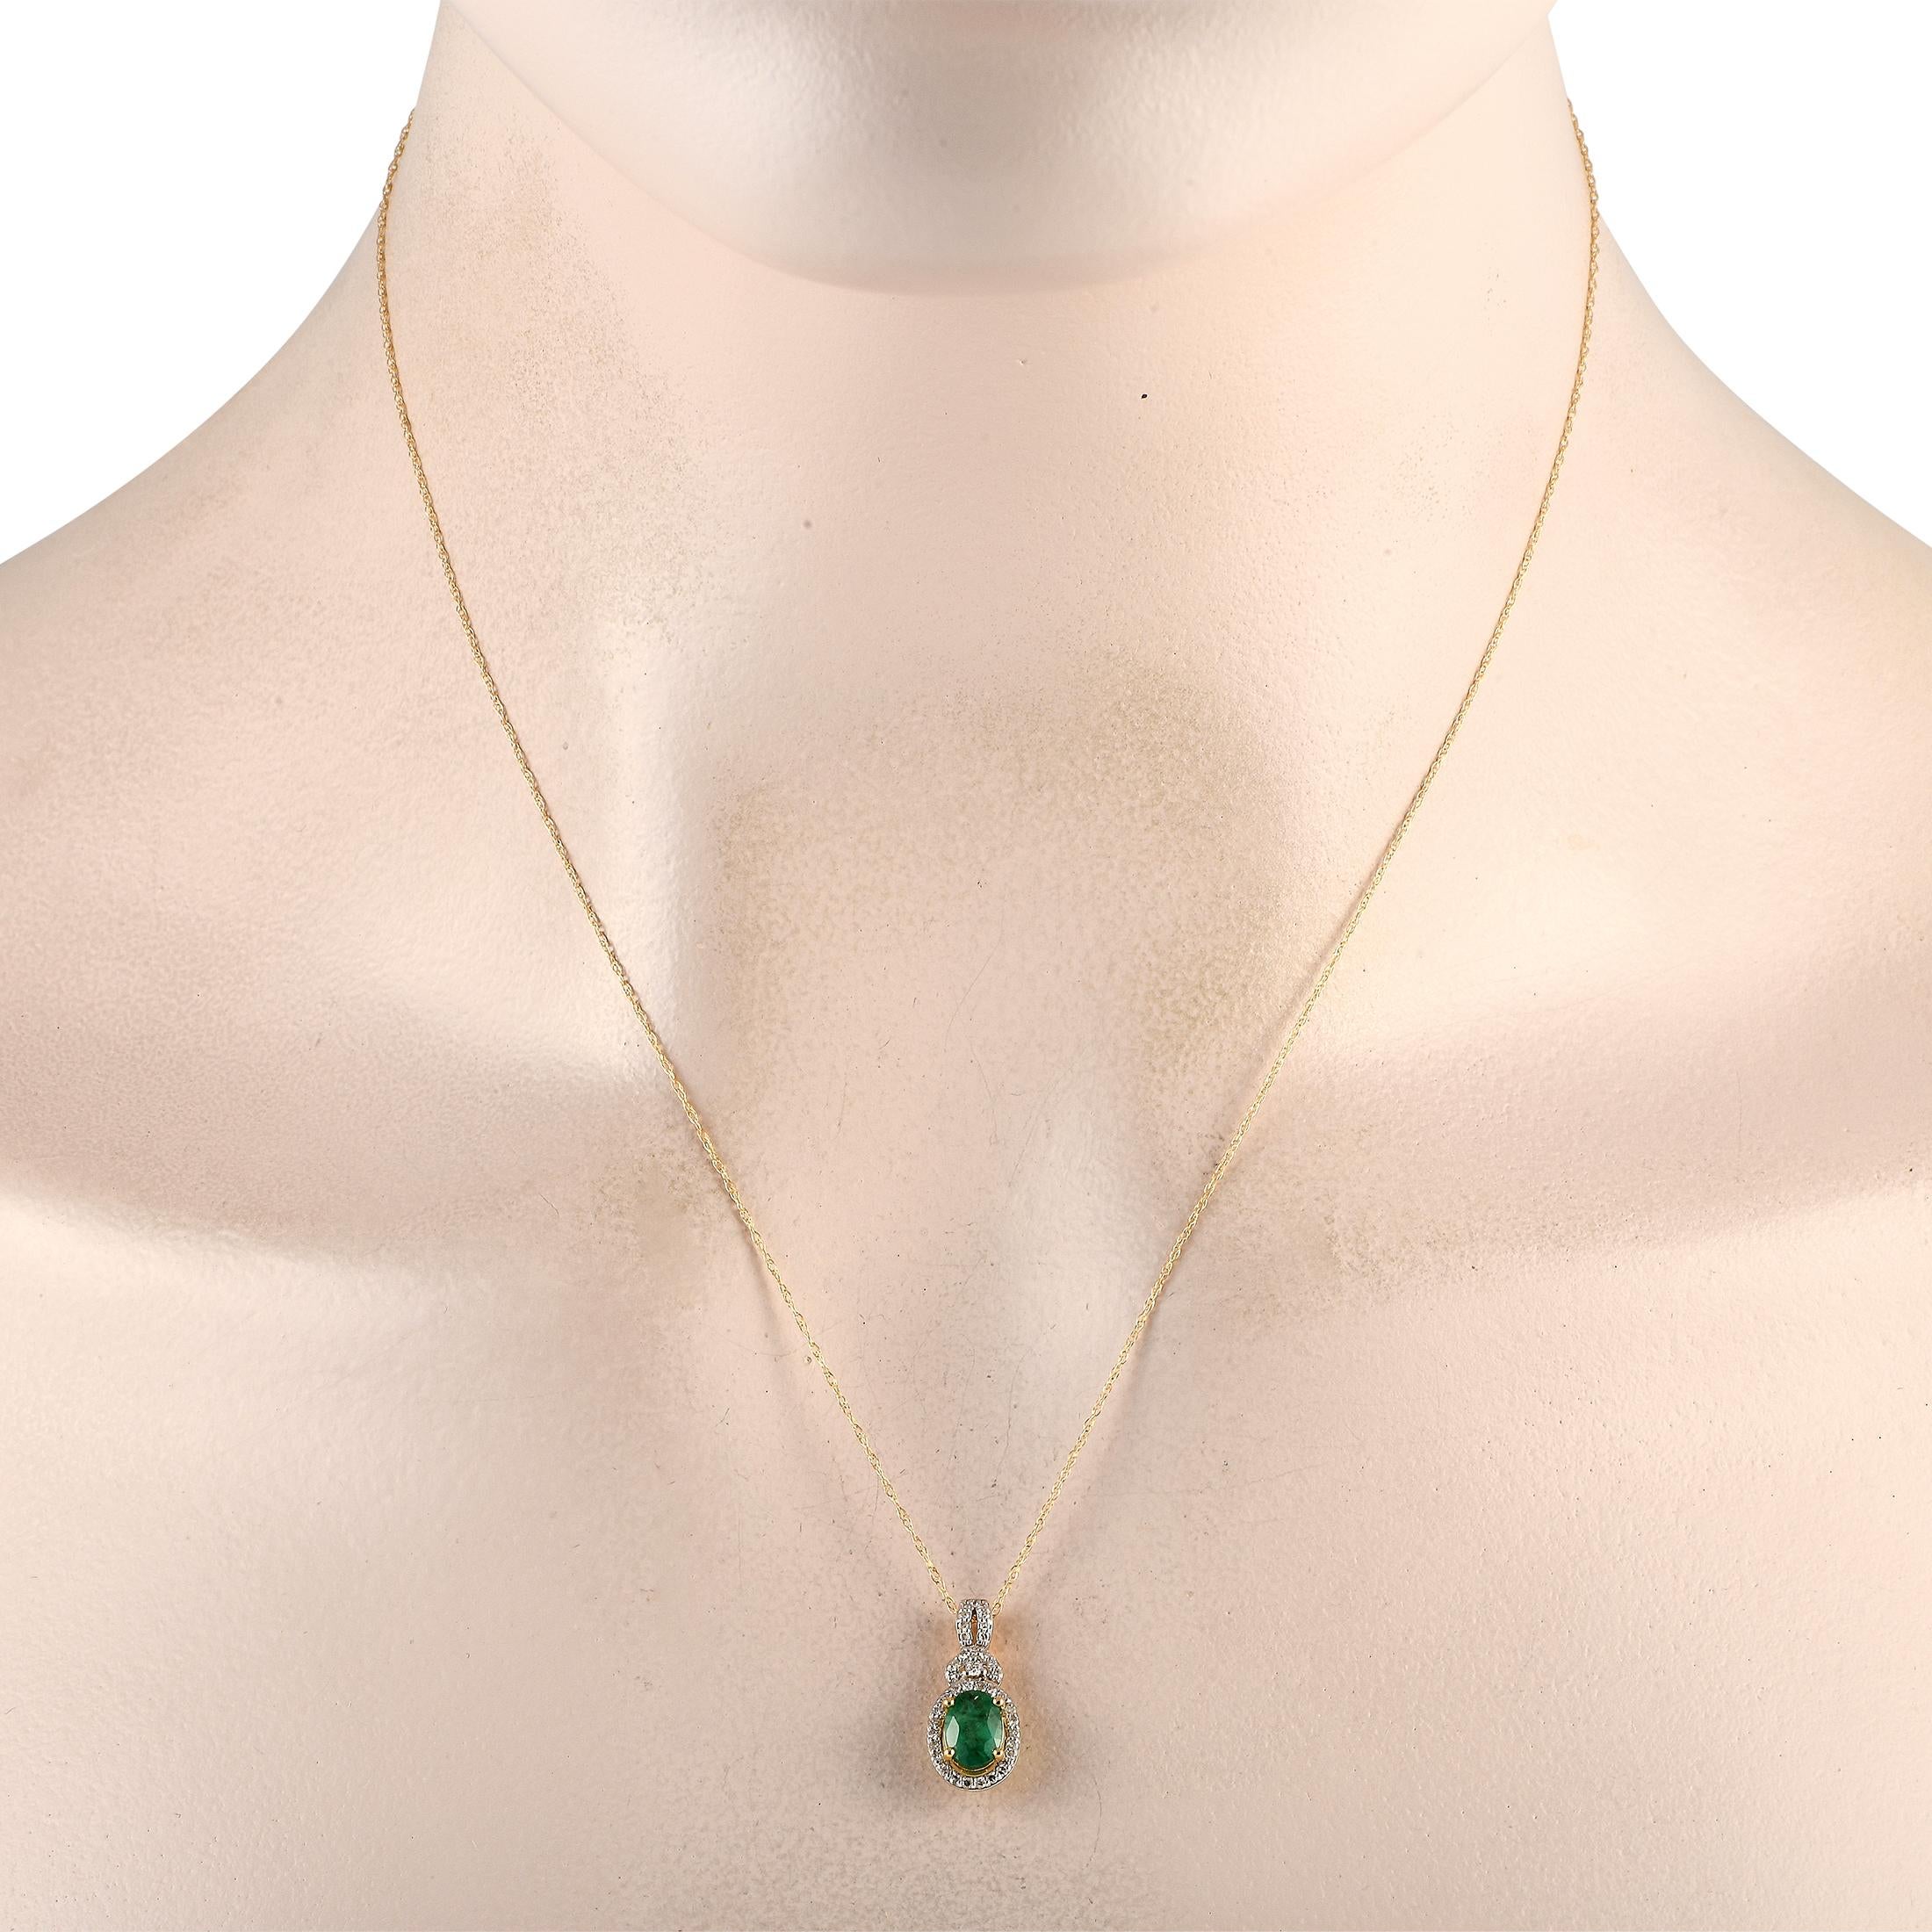 A classic piece that can be your new everyday piece. This 14K yellow gold necklace features a delicate cable chain measuring 18 inches long. It features a split-style bail traced with diamonds. The gorgeous green emerald stone haloed by an oval